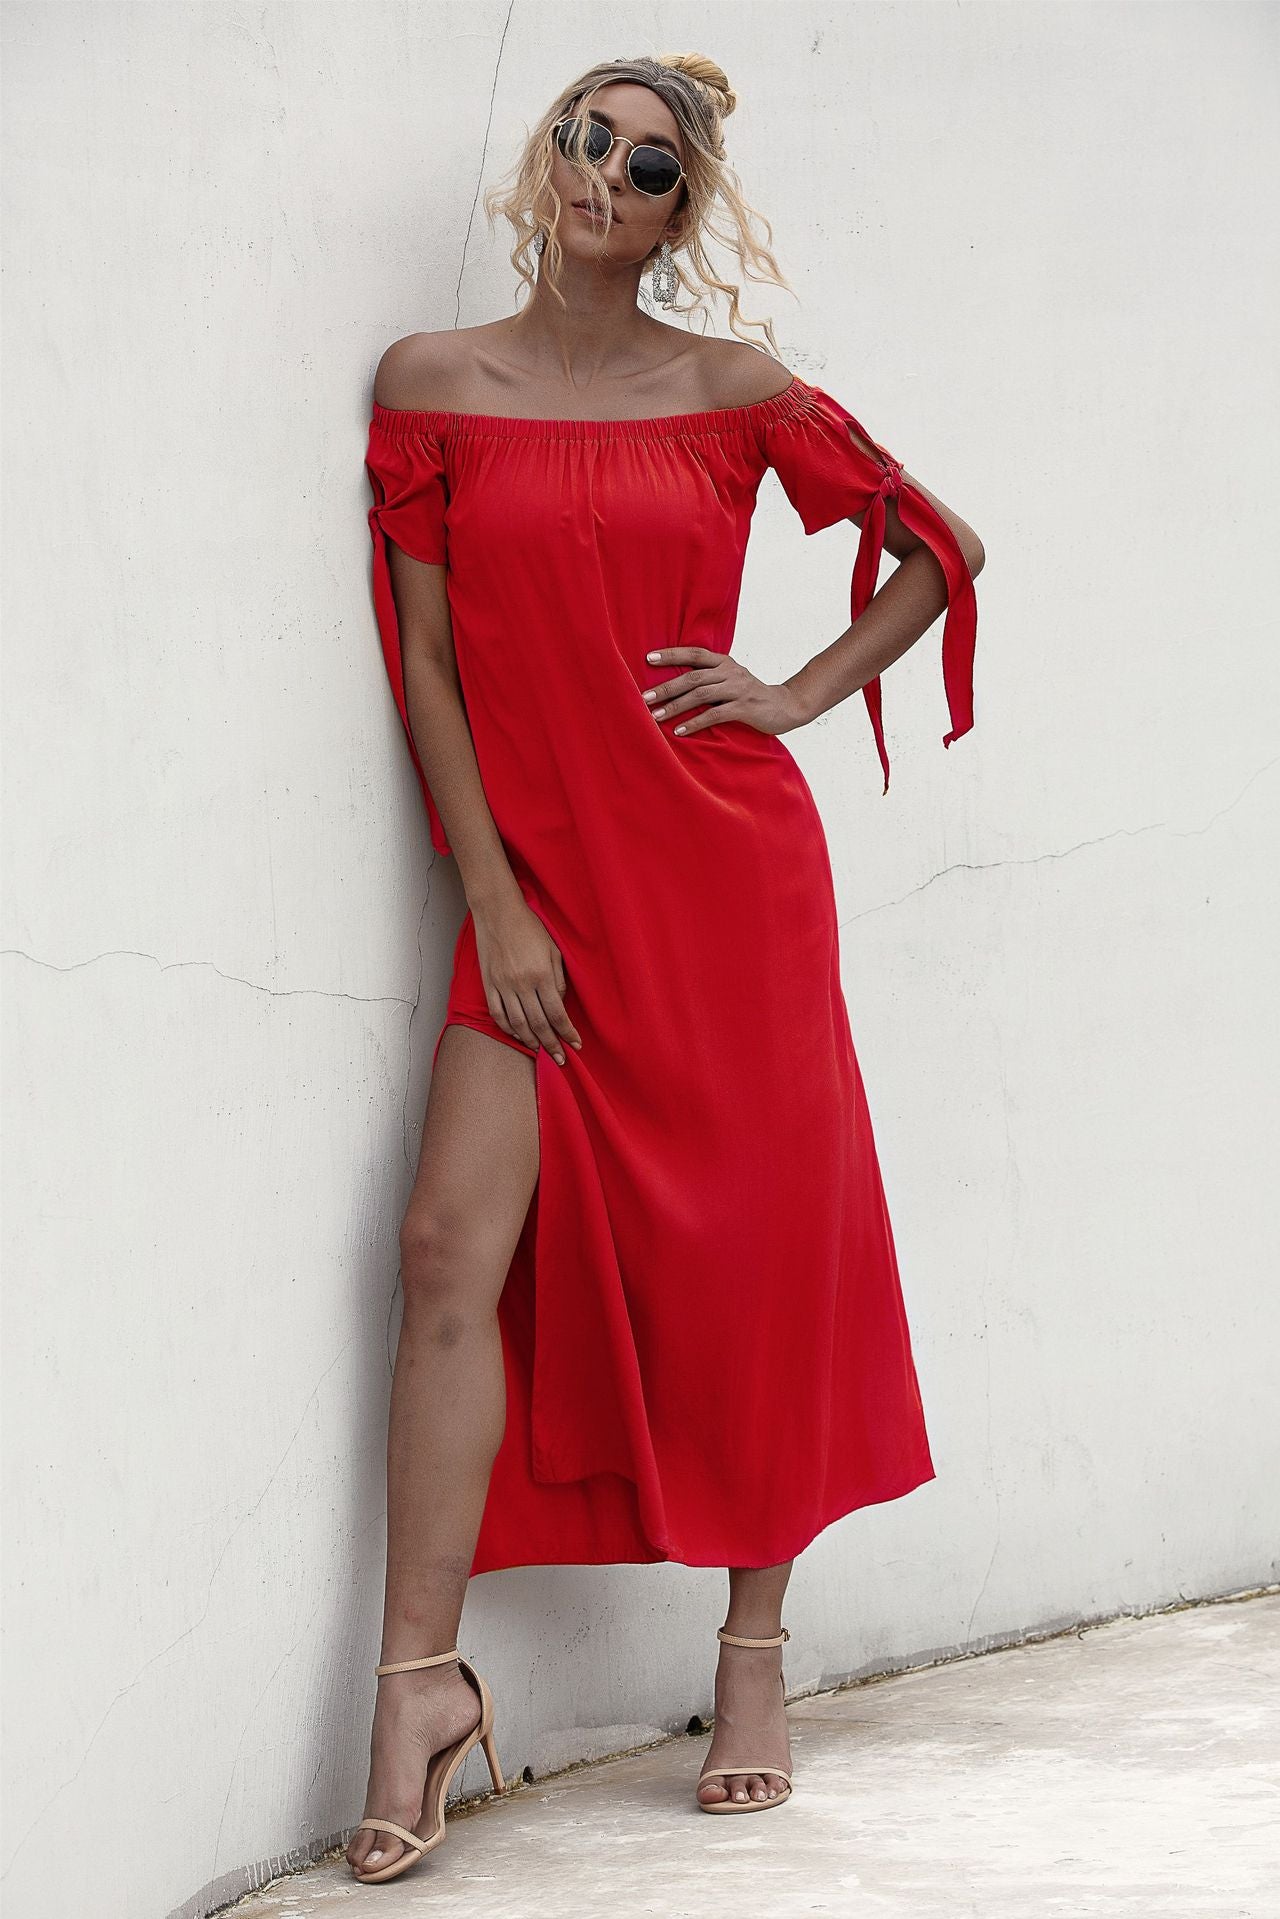 A woman in a Summer Straight Shoulder Split Beach Dress from Beachy Cover Ups, leaning against a wall.